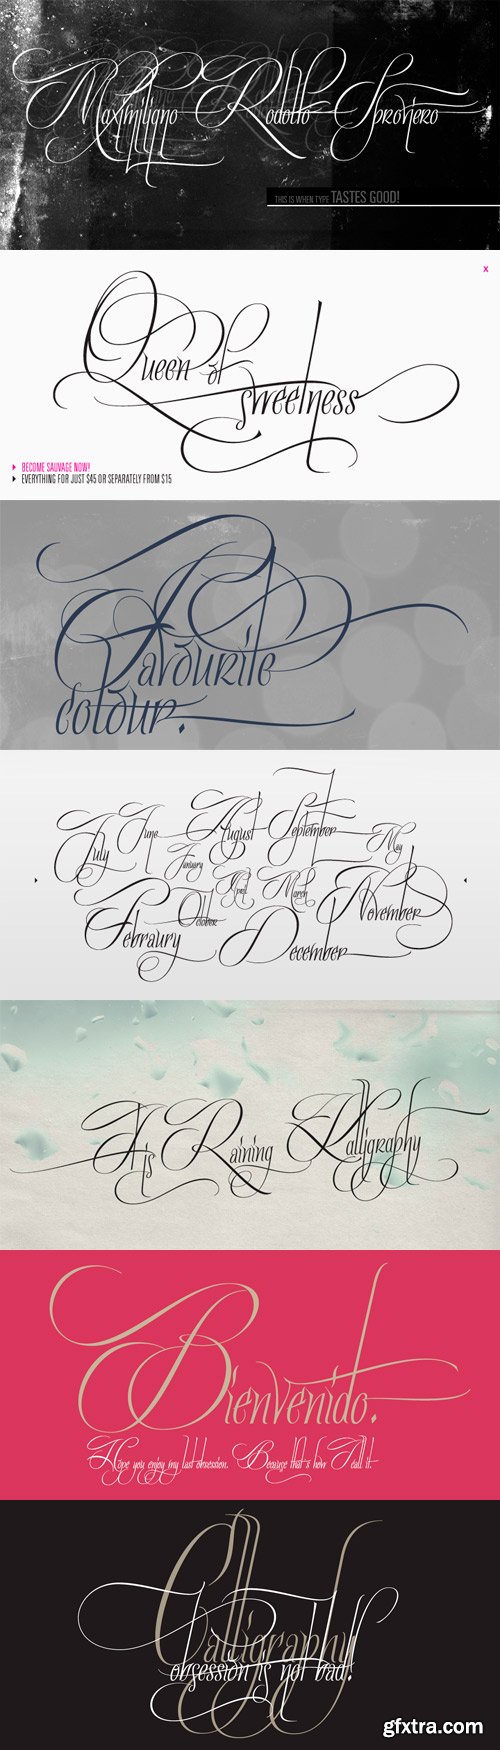 Quijote Sauvage Font Family - 8 Fonts for $115